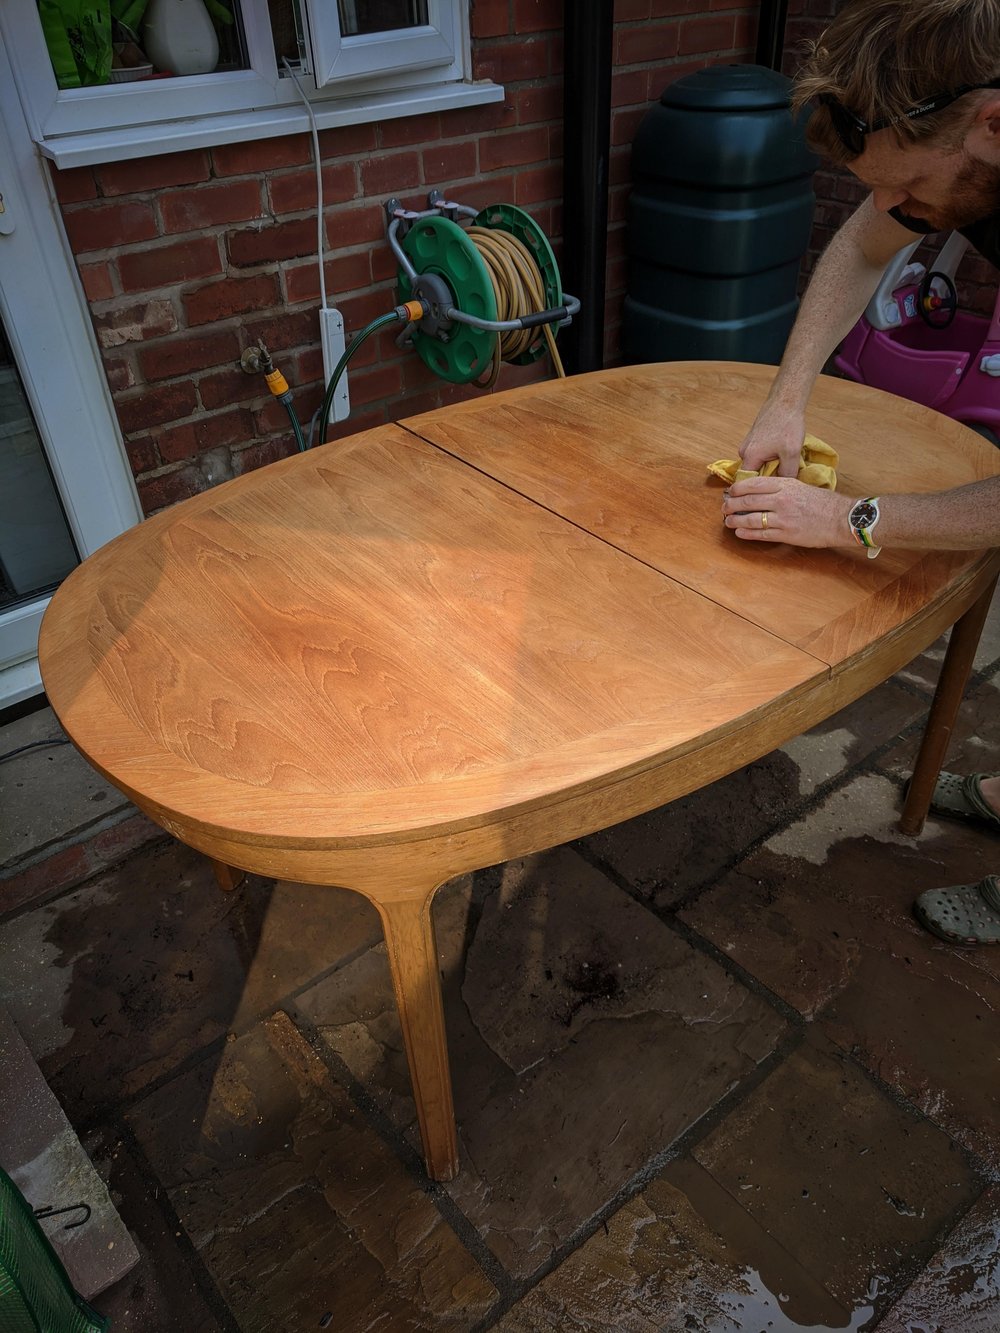 Treating our hand-me-down dining table with beeswax and love